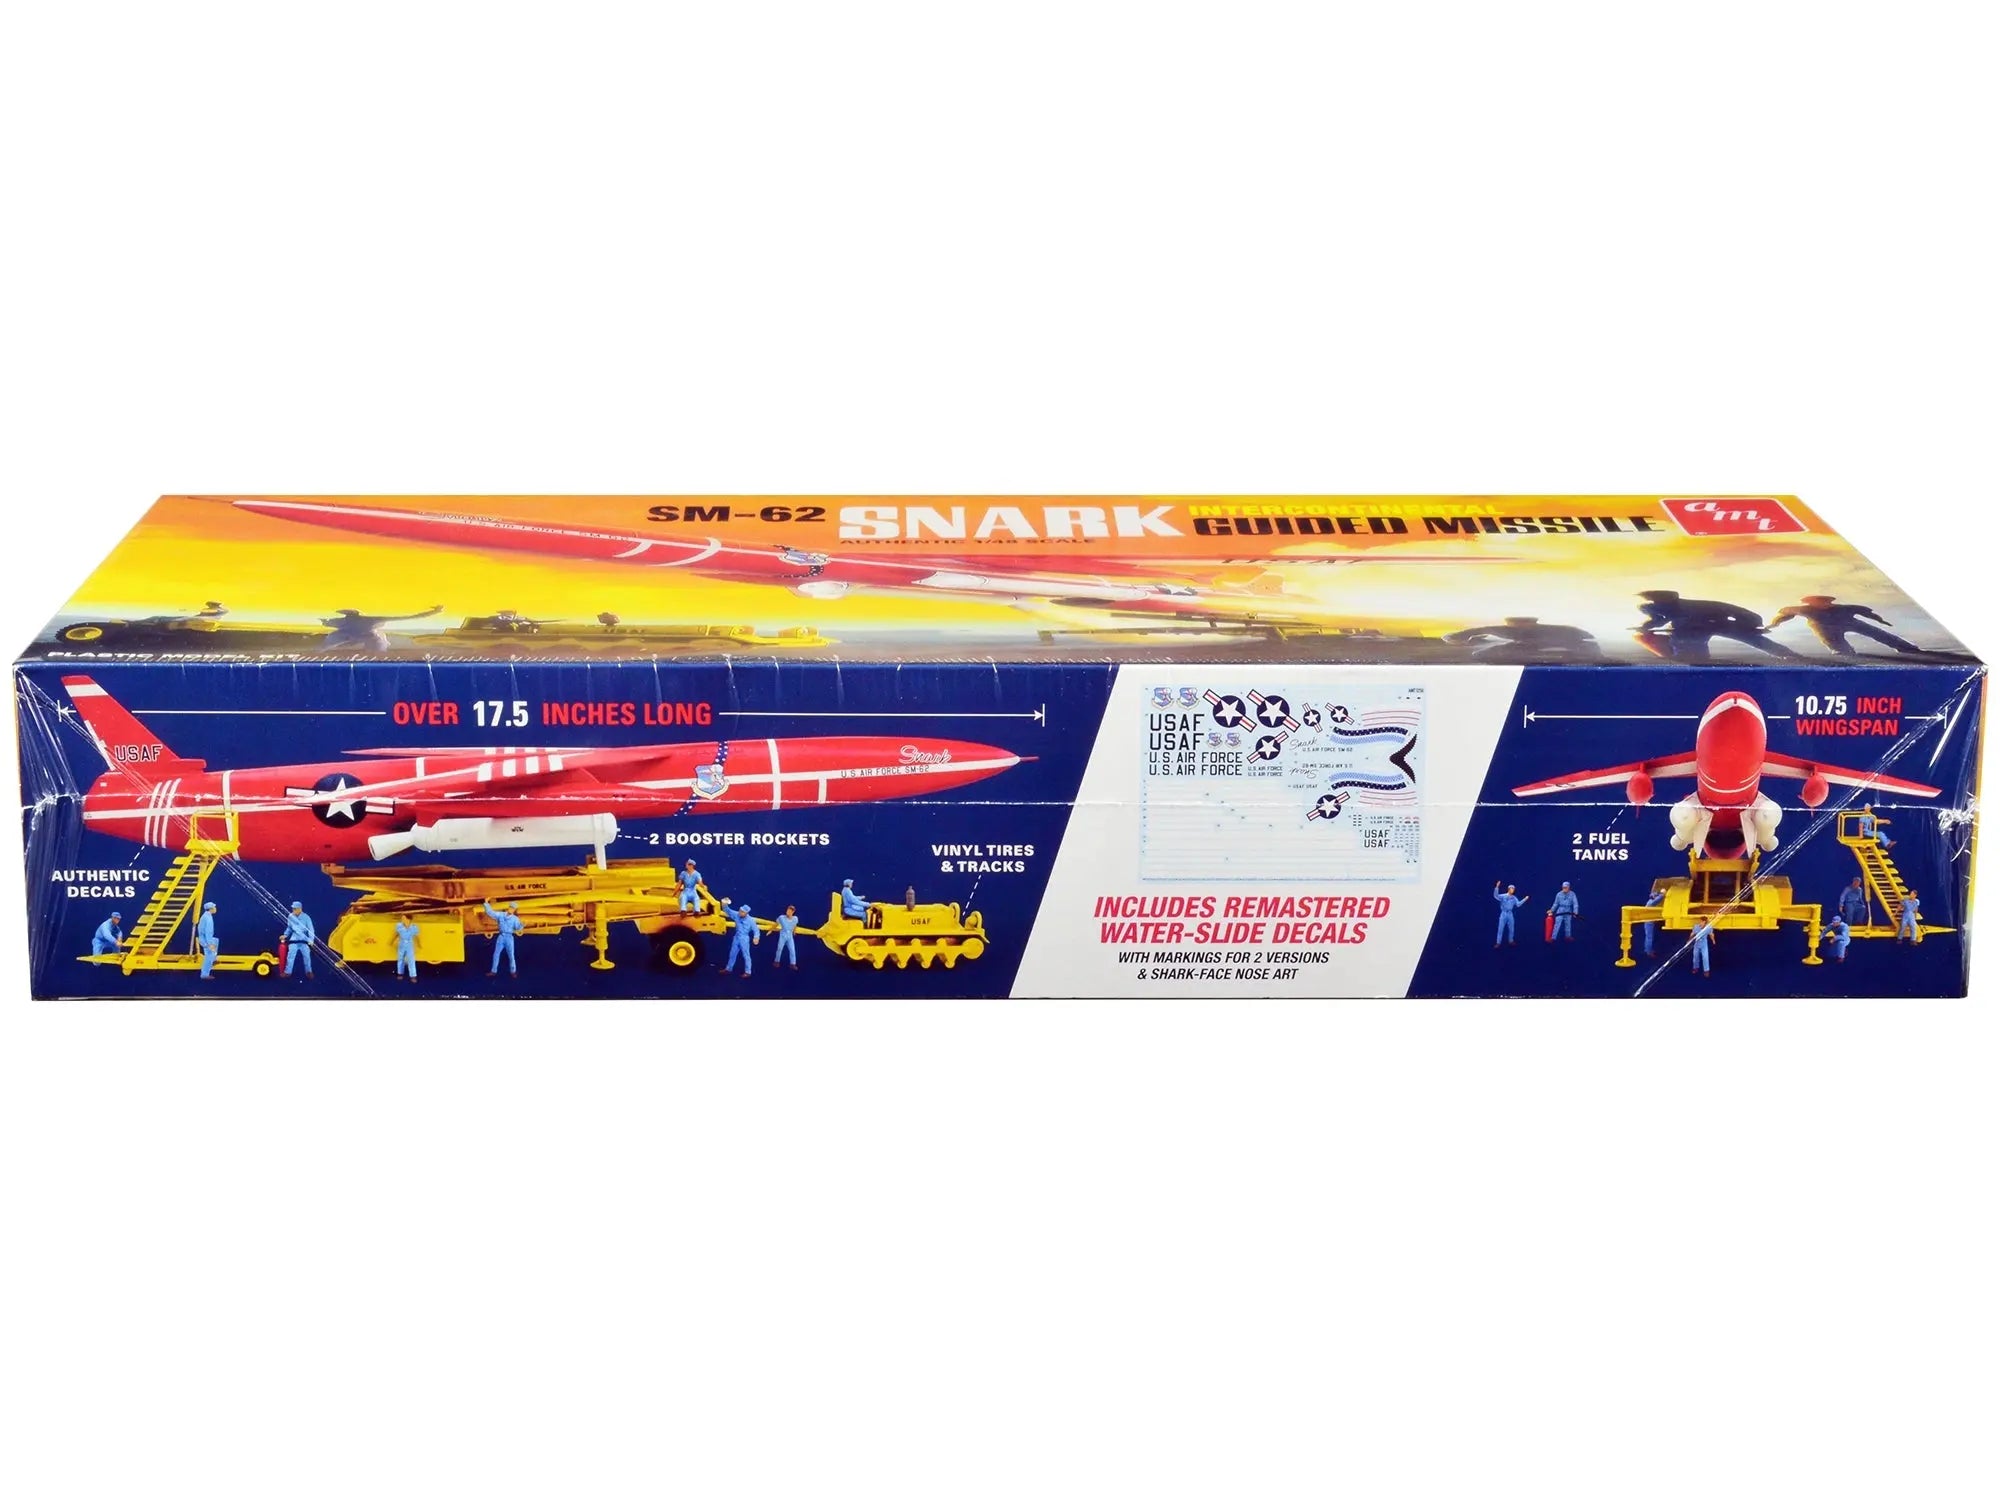 Skill 2 Model Kit Northrop SM-62 Snark Intercontinental Guided Missile 1/48 Scale Model by AMT AMT